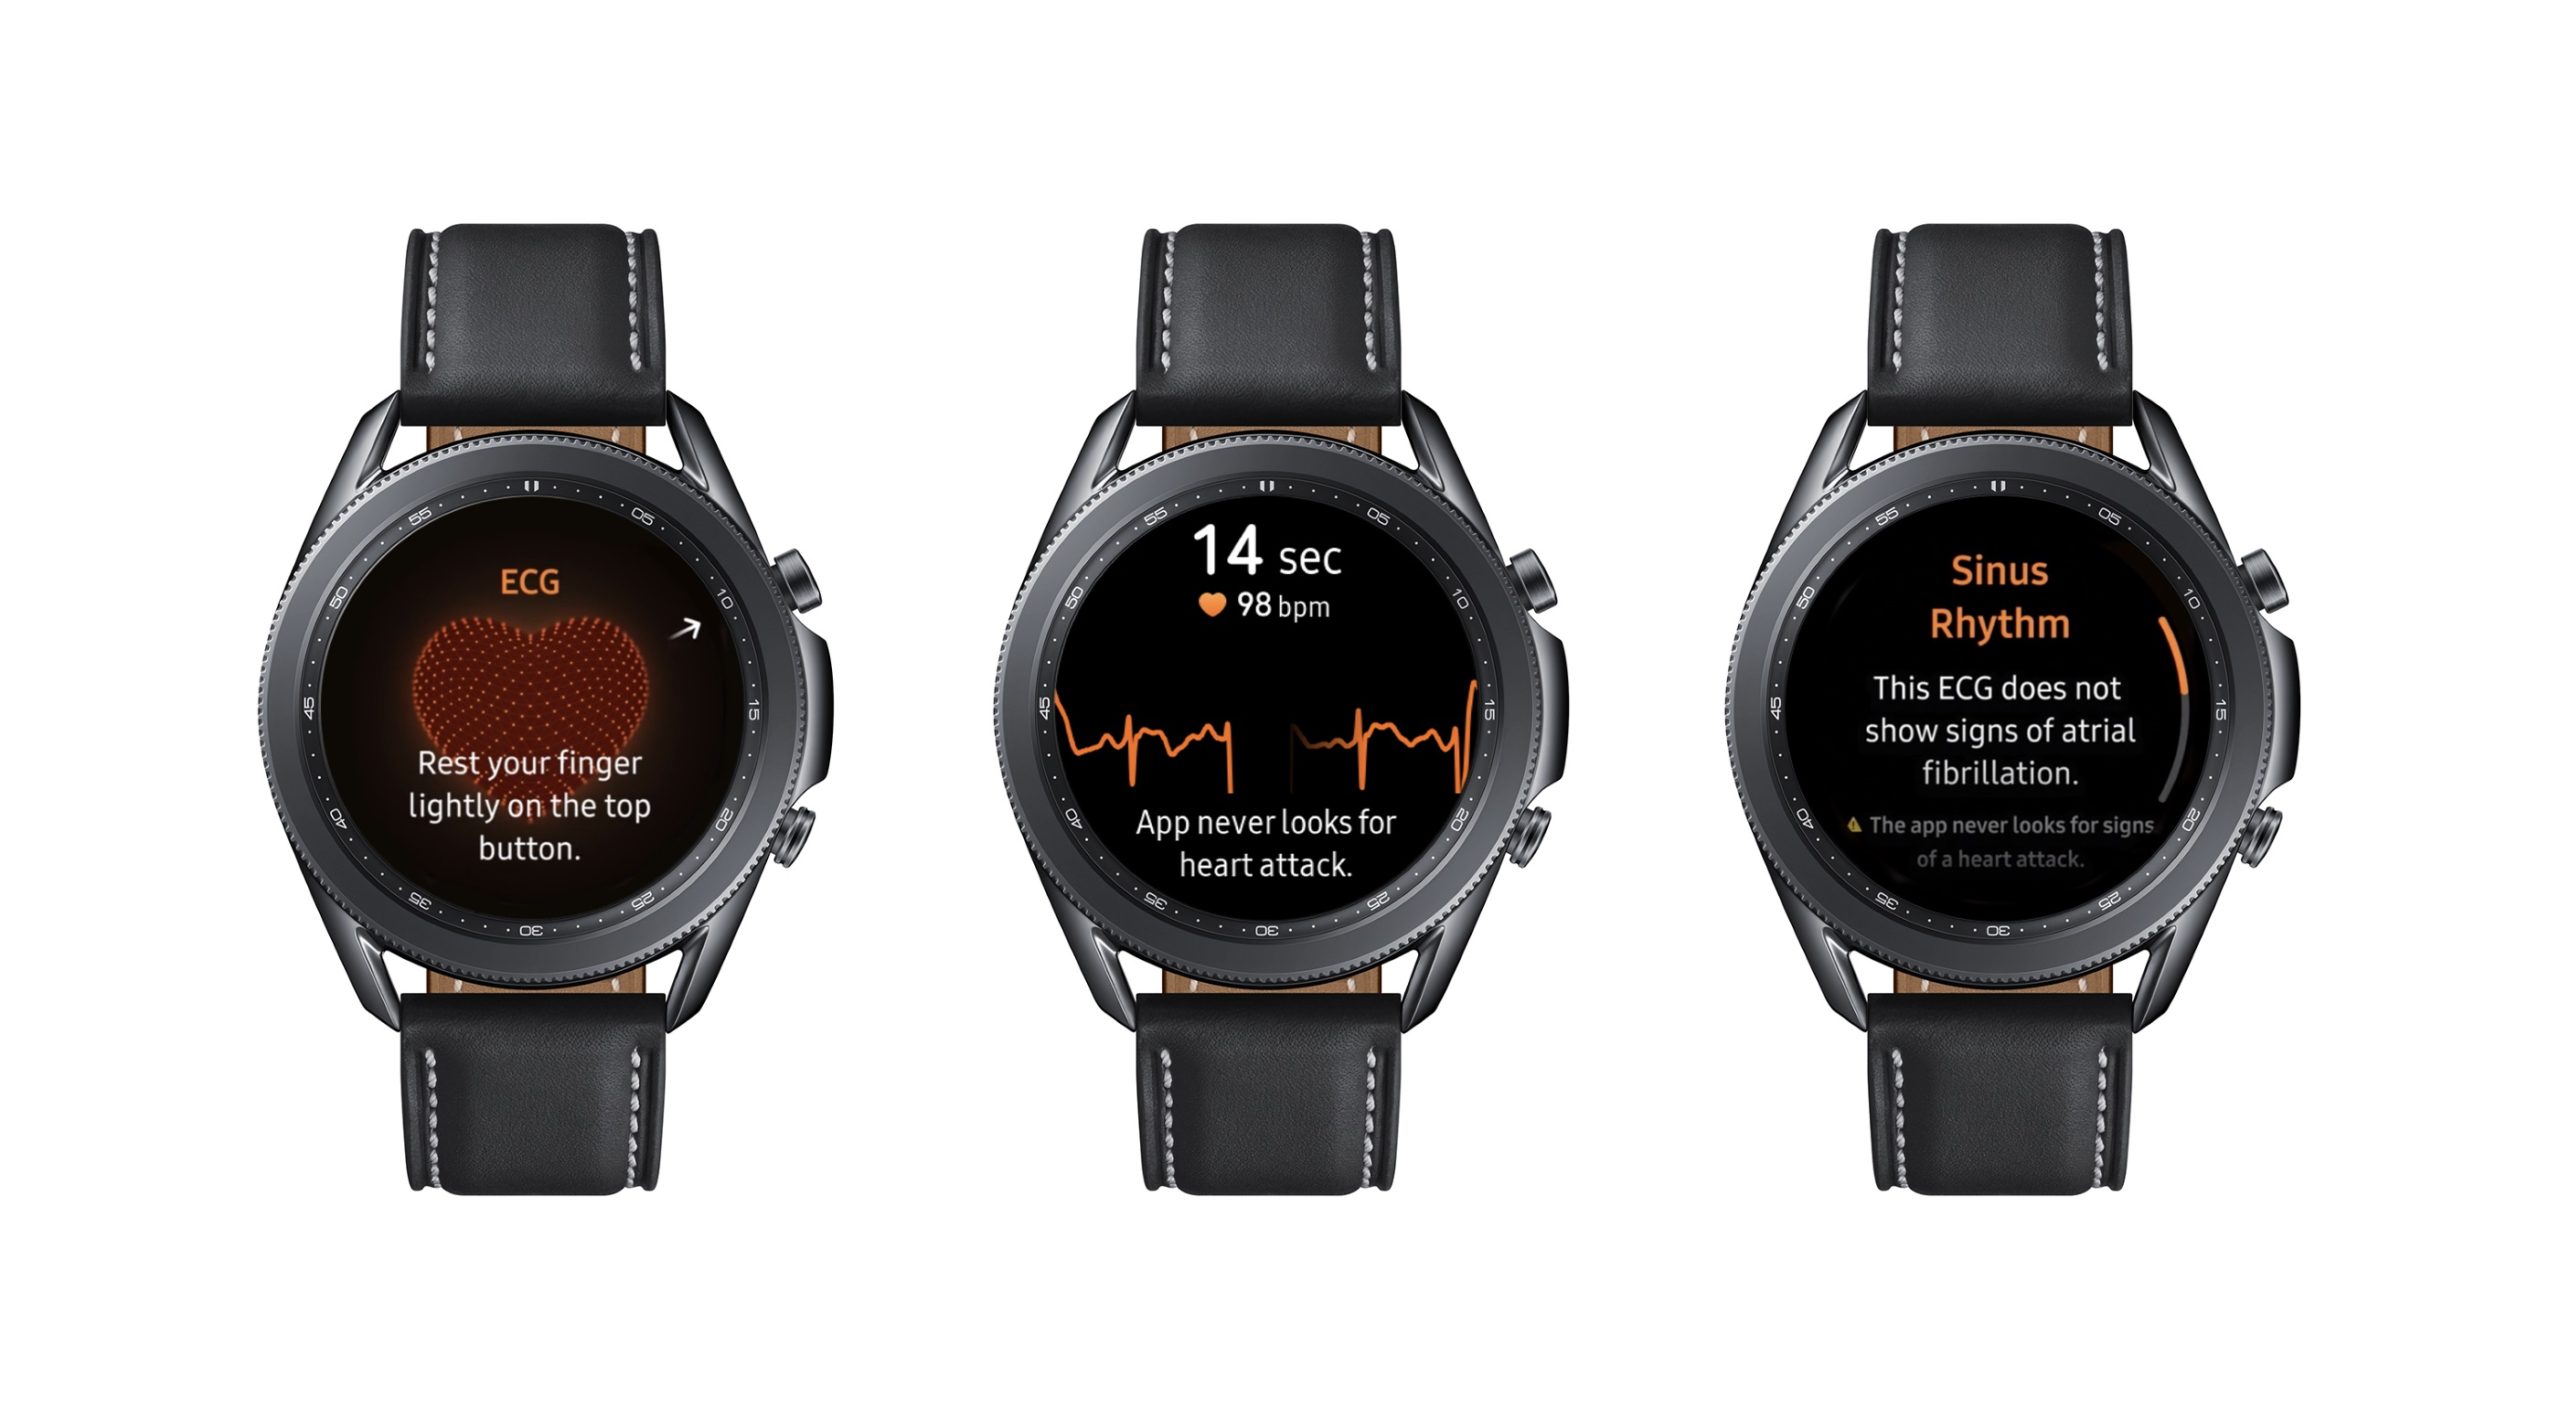 Image for Samsung Introduces Vital Blood Pressure And Electrocardiogram Tracking To Galaxy Watch3 And Galaxy Watch Active2 In The UAE